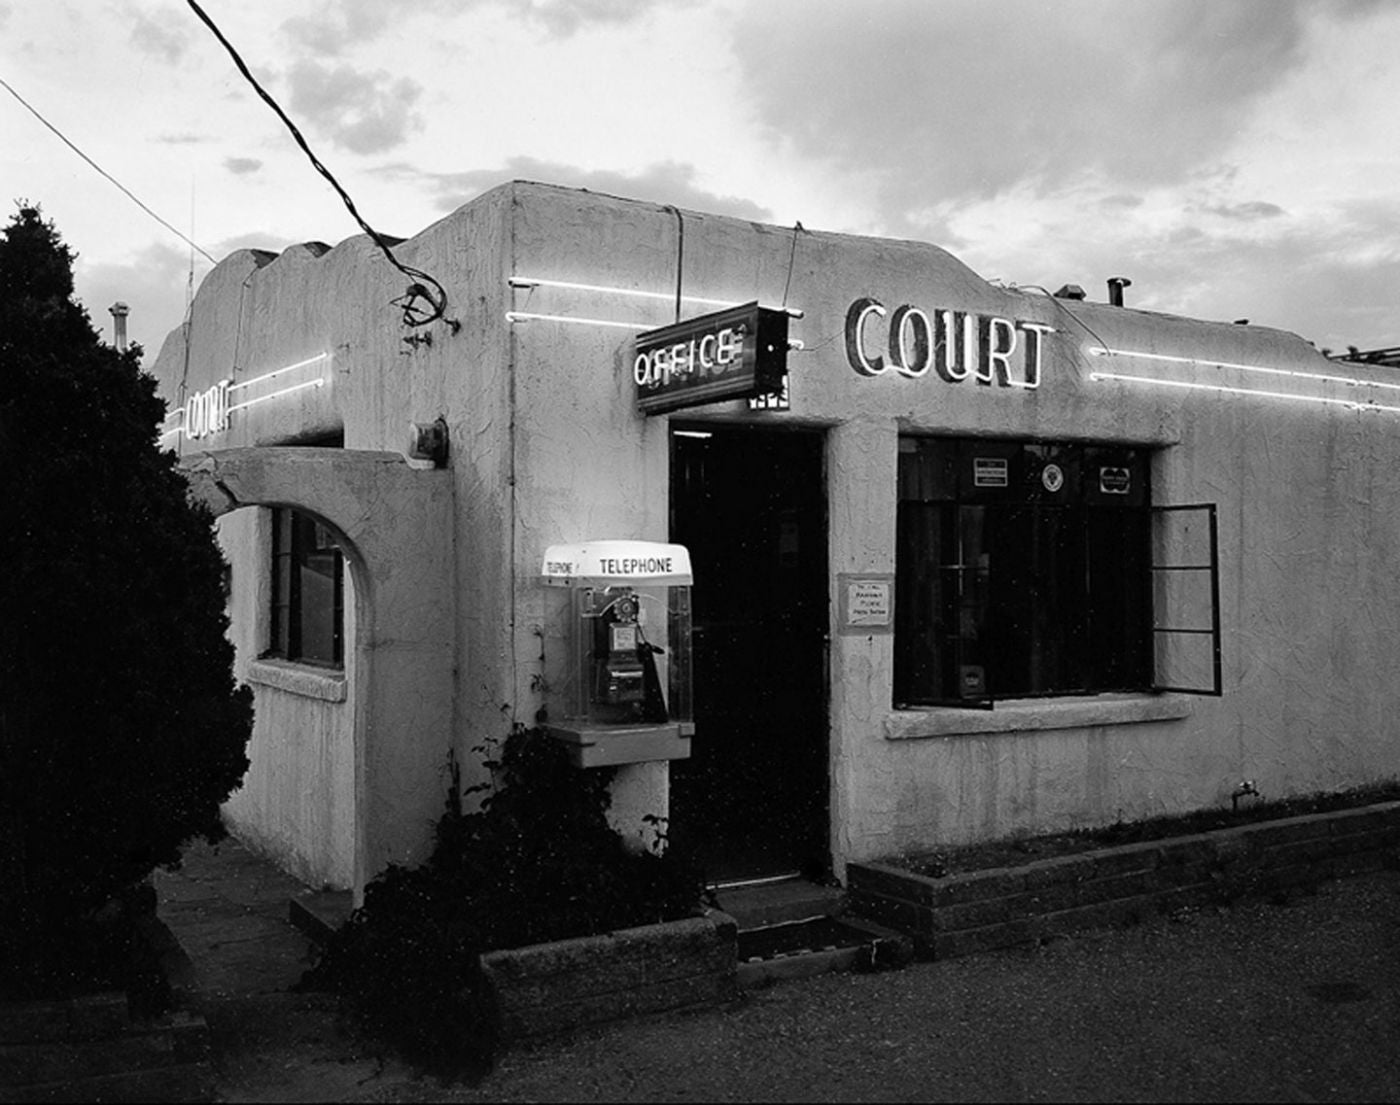 NZ Library #1: John Schott: Route 66, Special Limited Edition (with Gelatin Silver Contact Print "Untitled" from the Series "Route 66 Motels," El Pueblo Court Motel Office with Pay Telephone) (NZ Library - Set One, Volume Six)